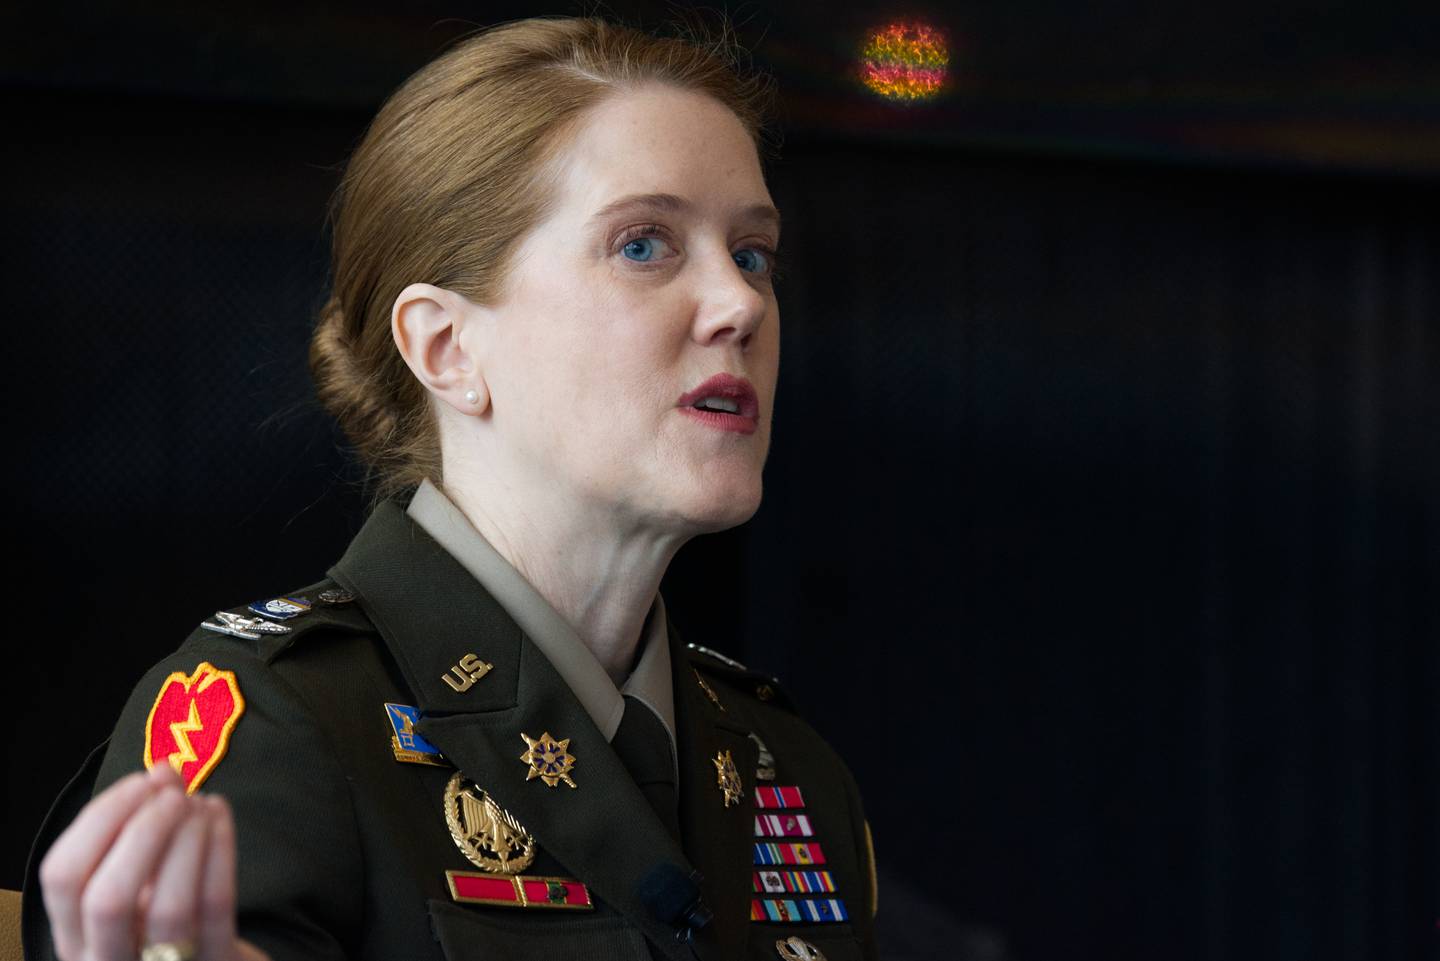 Col. Candice Frost, commander of the Joint Intelligence Operations Center at U.S. Cyber Command, gestures as she speaks Feb. 28, 2023, at an event hosted by Billington Cybersecurity.